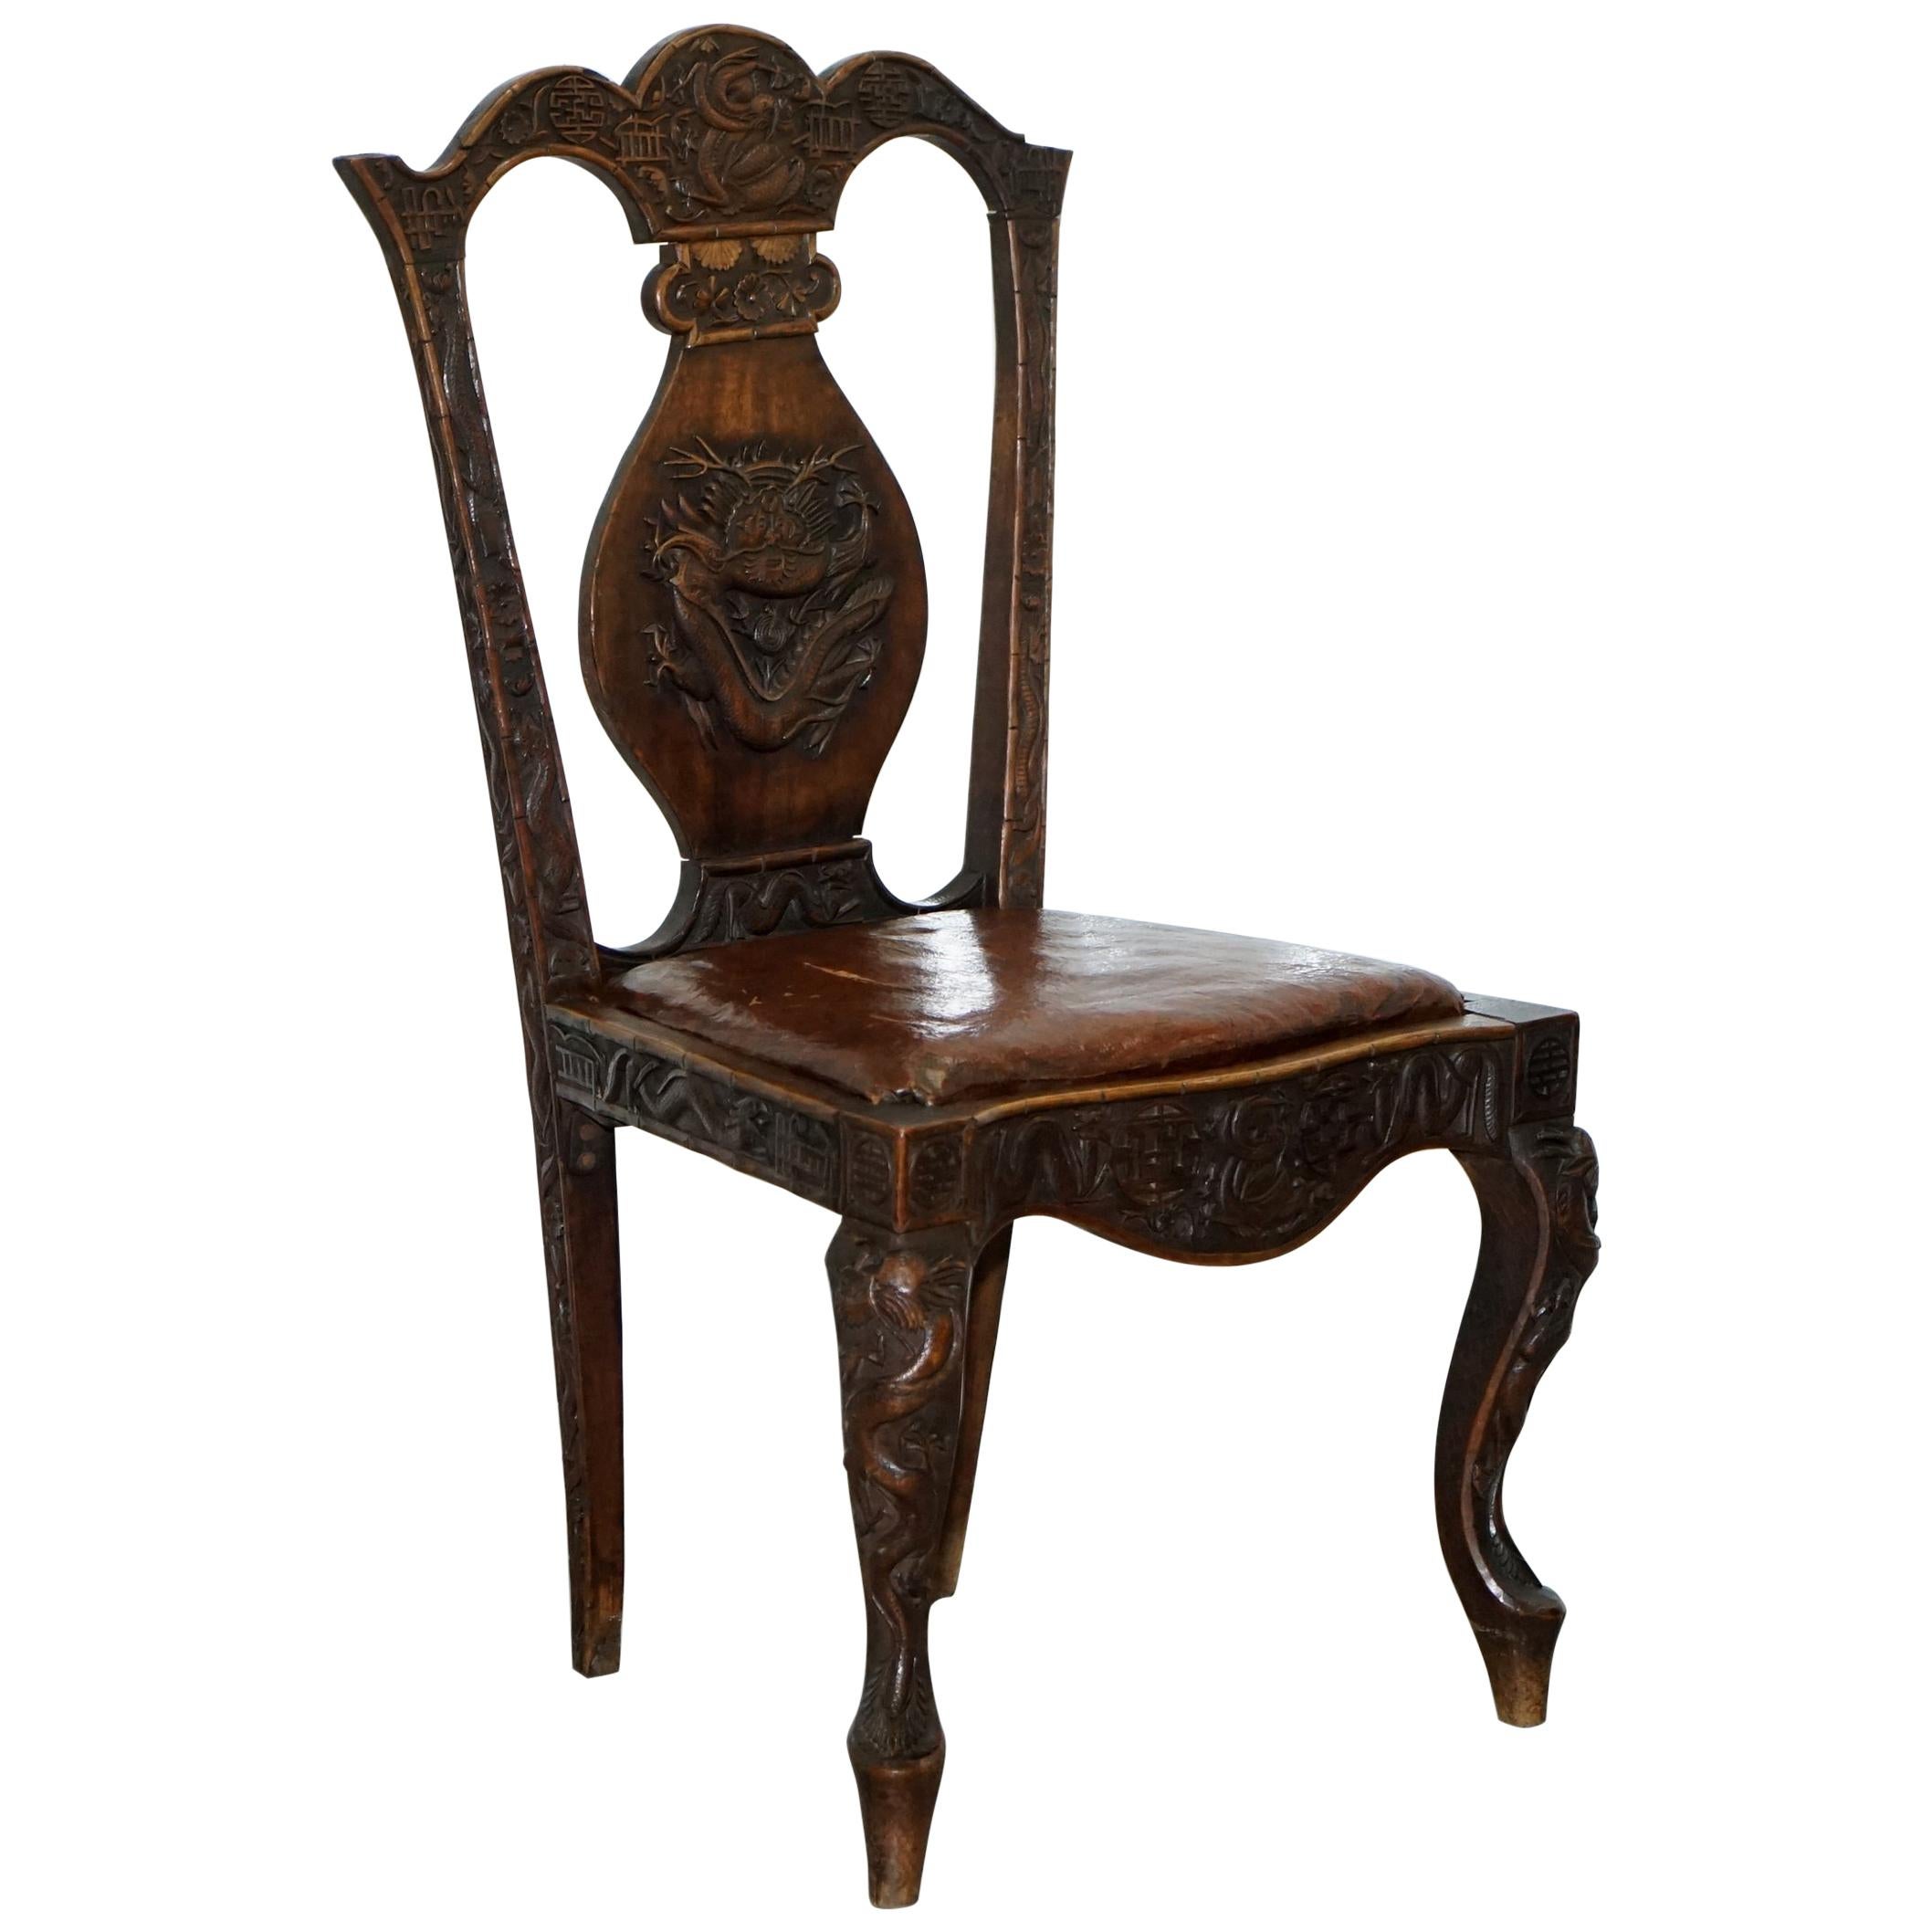 Chinese Export Dining Chair Chimera Dragons Etc Part of Large Suite, circa 1890